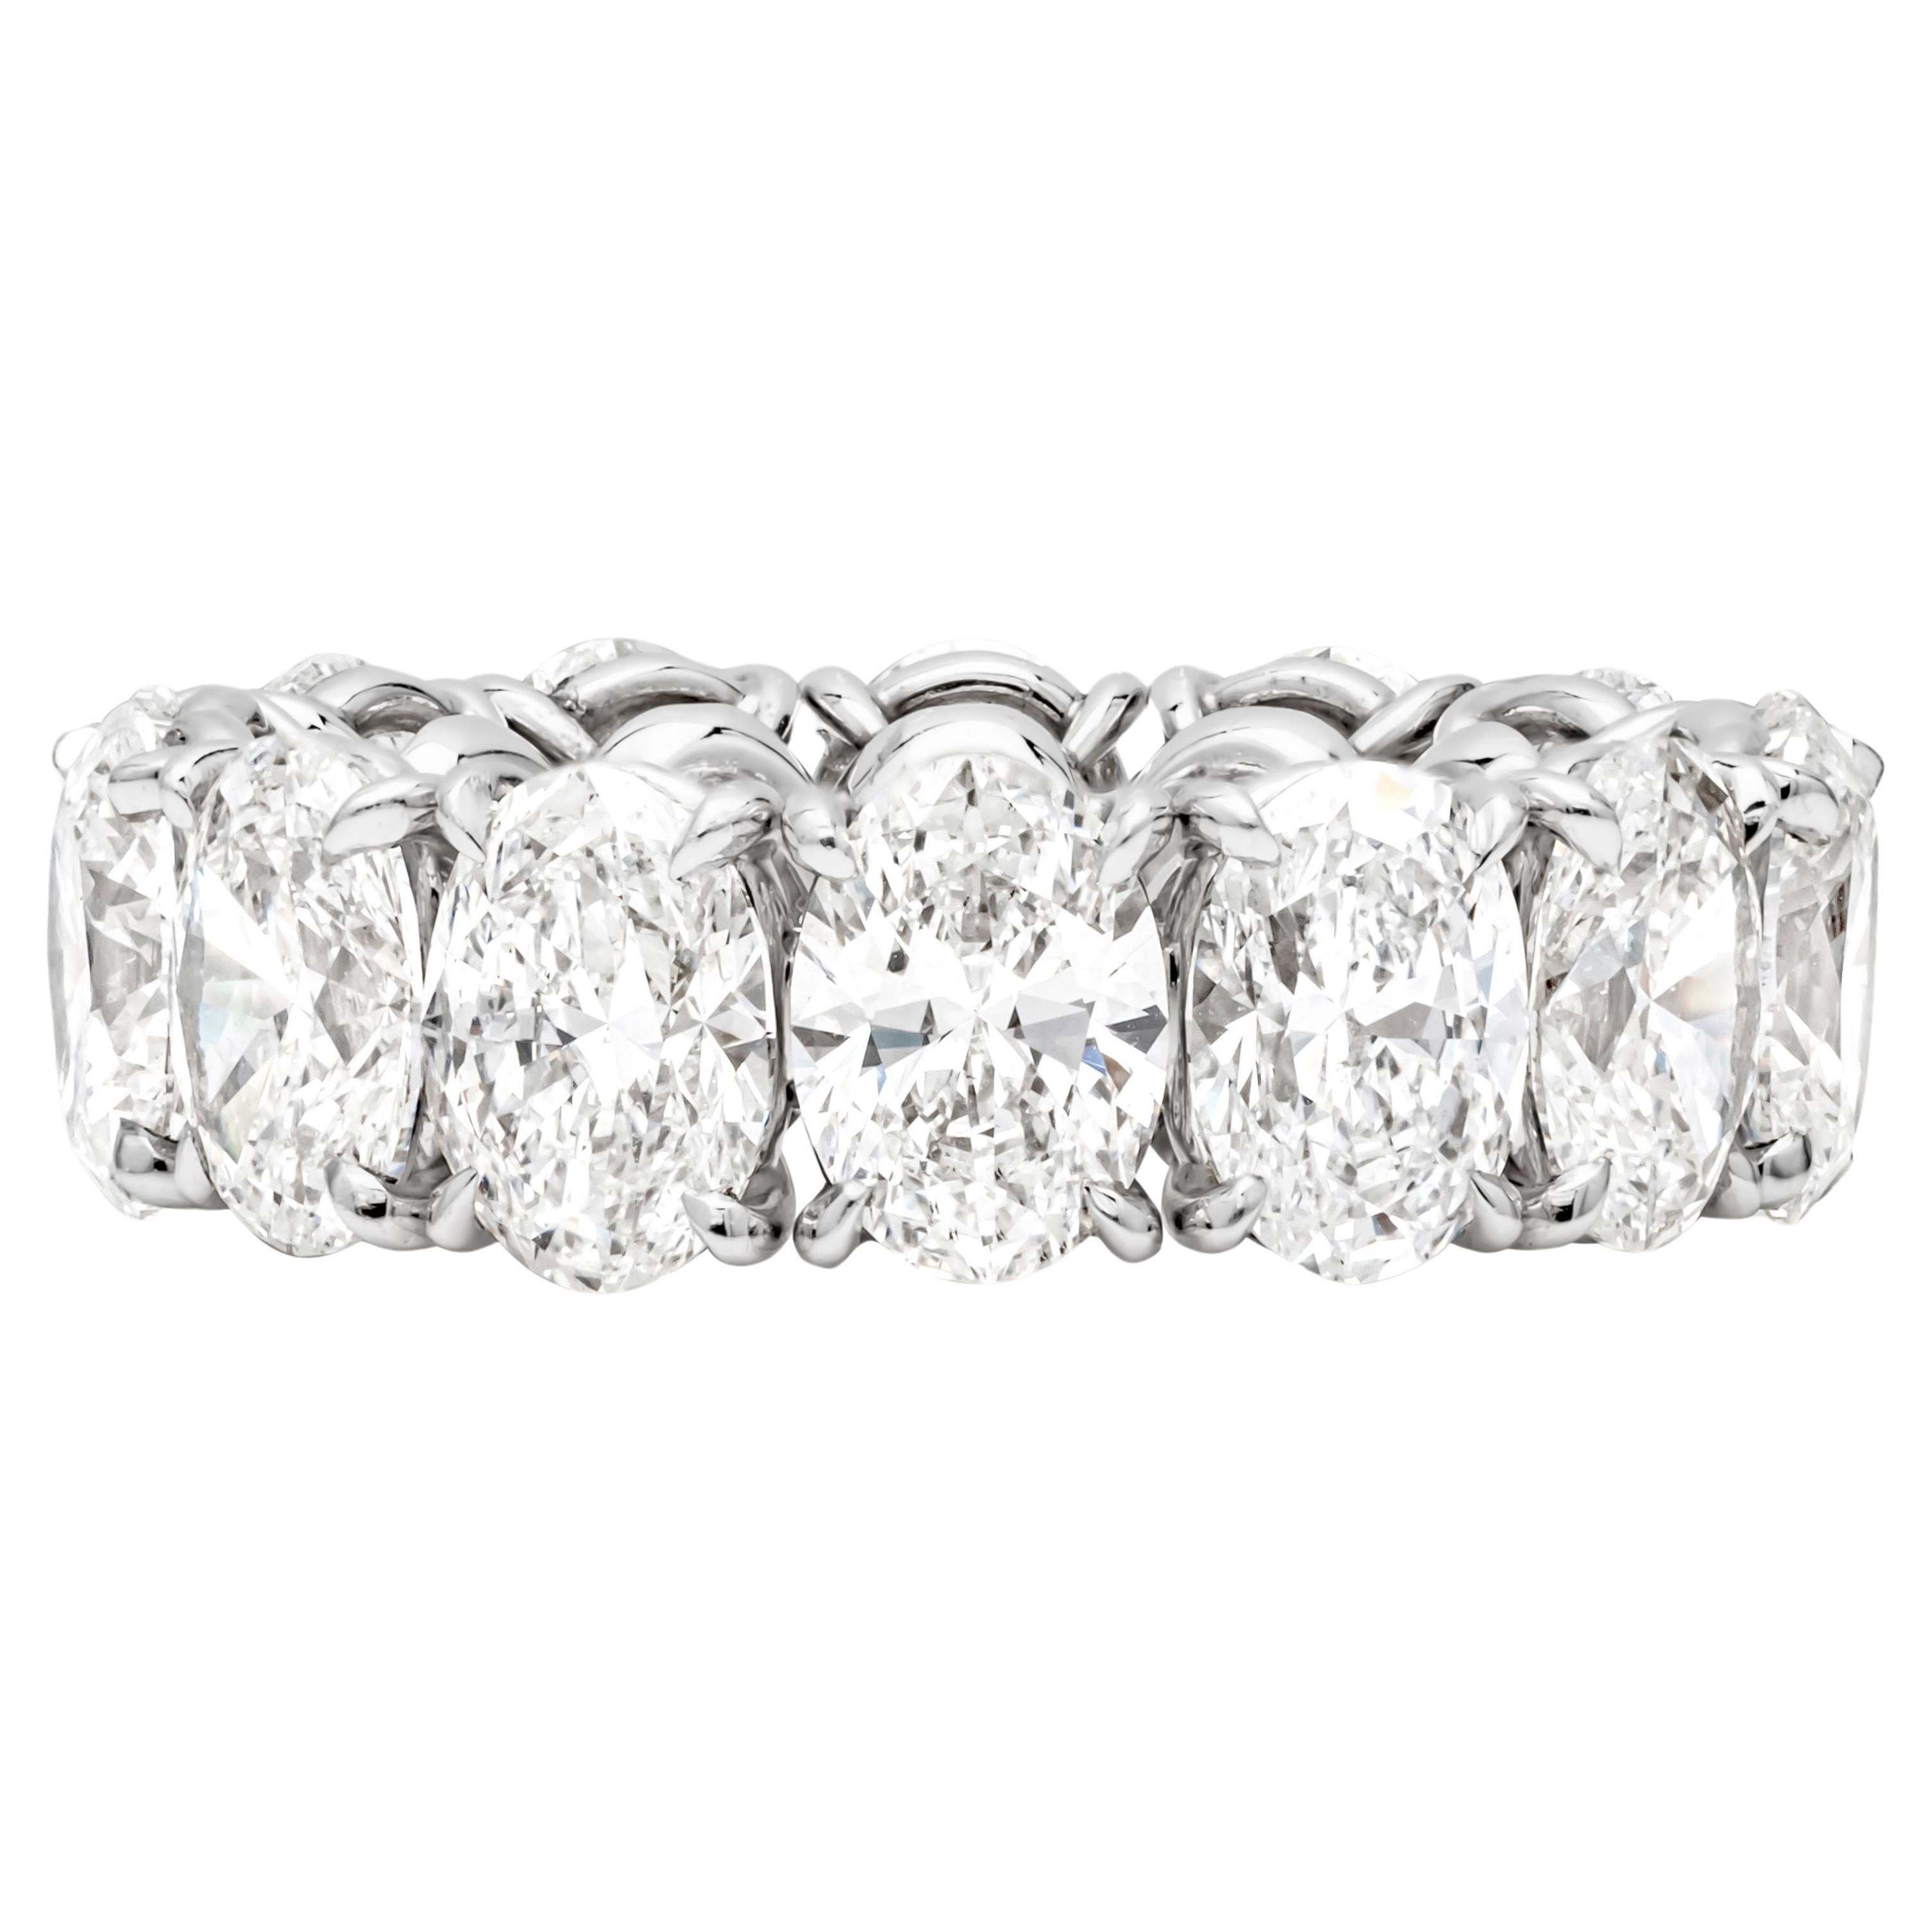 This gorgeous wedding band features 14 brilliant oval cut diamonds weighing 10.25 carats total. Set in an eternity style setting. Each diamond is certified by GIA. The colors of the diamonds range from D-F and VS-SI2 clarity. Made in platinum. Size